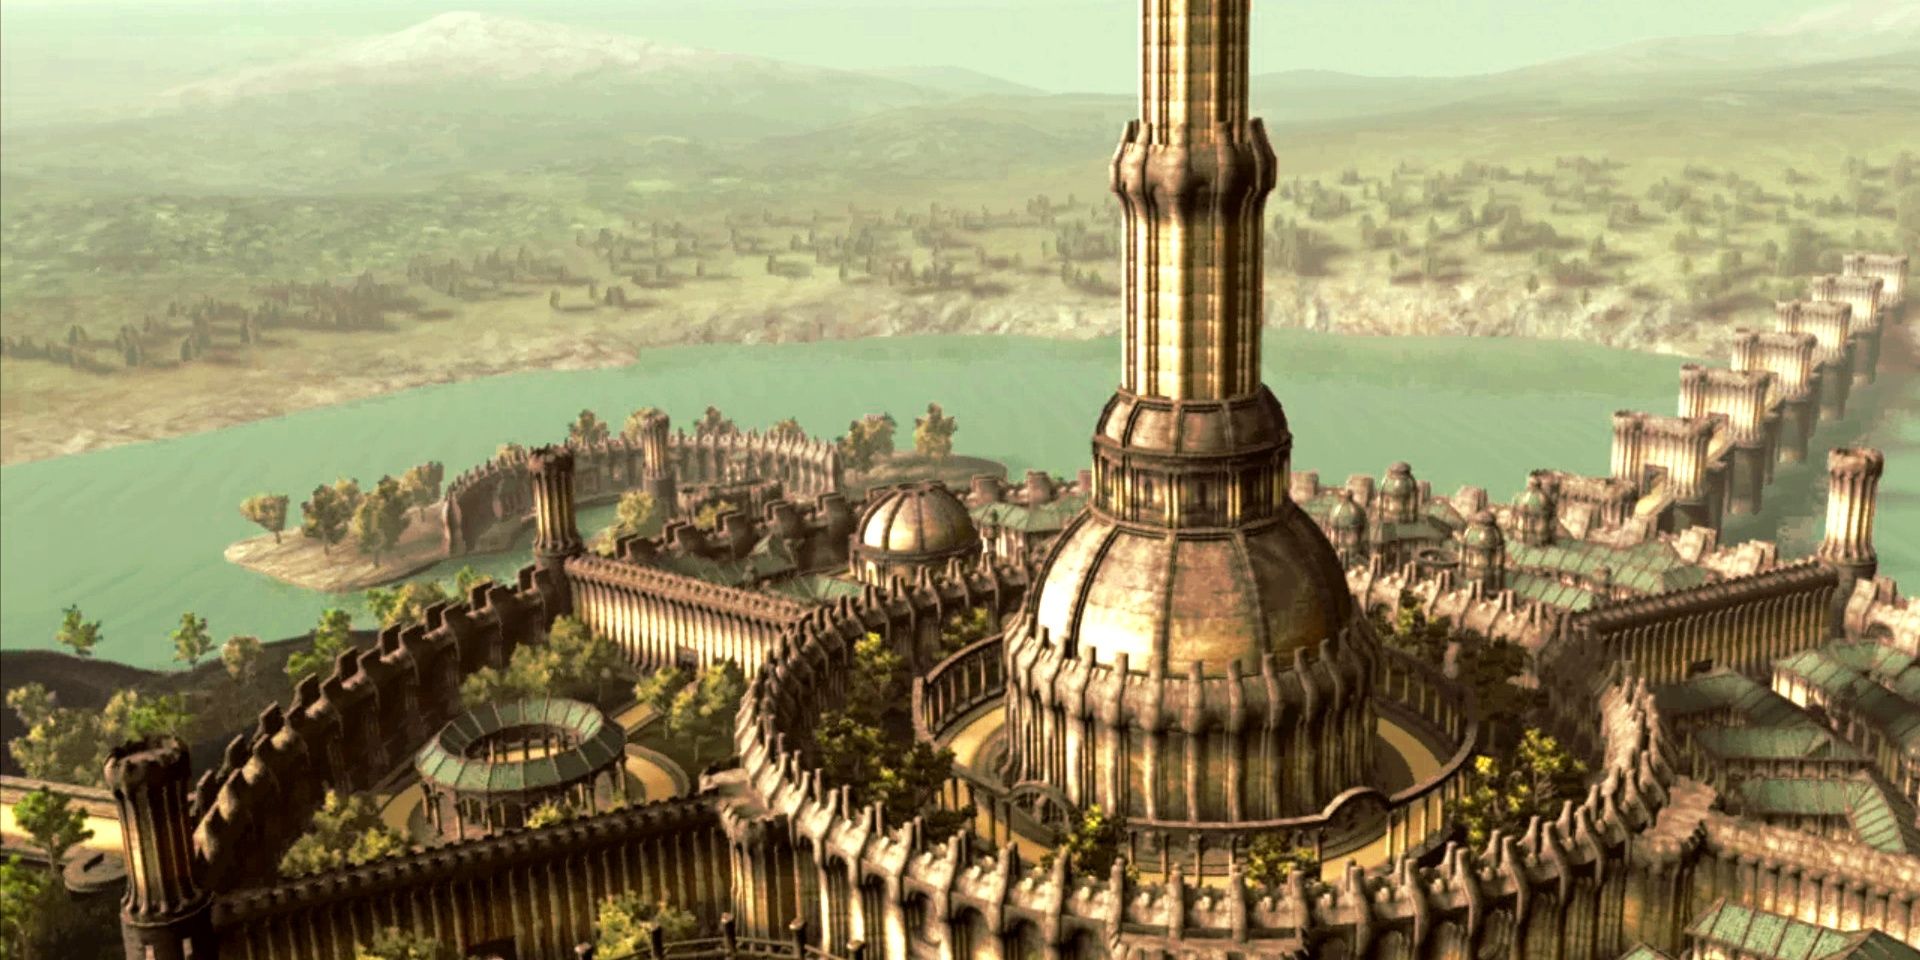 image of the Imperial City of Cyrodiil in The Elder Scrolls IV Oblivion